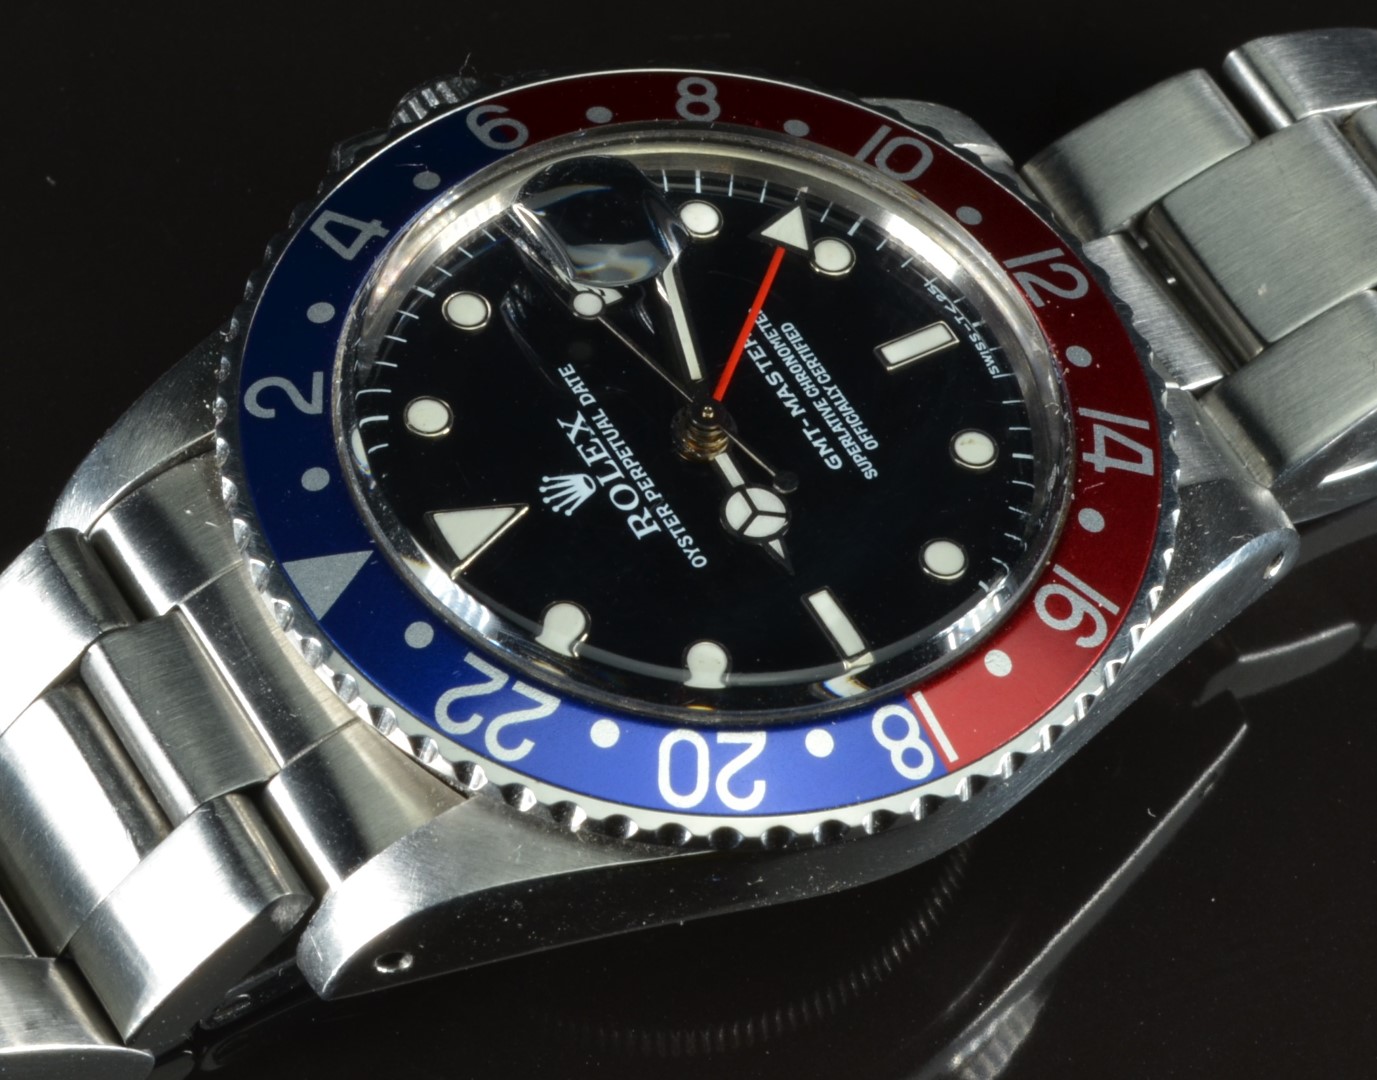 Rolex GMT Master gentleman's diver's/ pilots automatic wristwatch ref. 16750 with date aperture, - Image 6 of 7